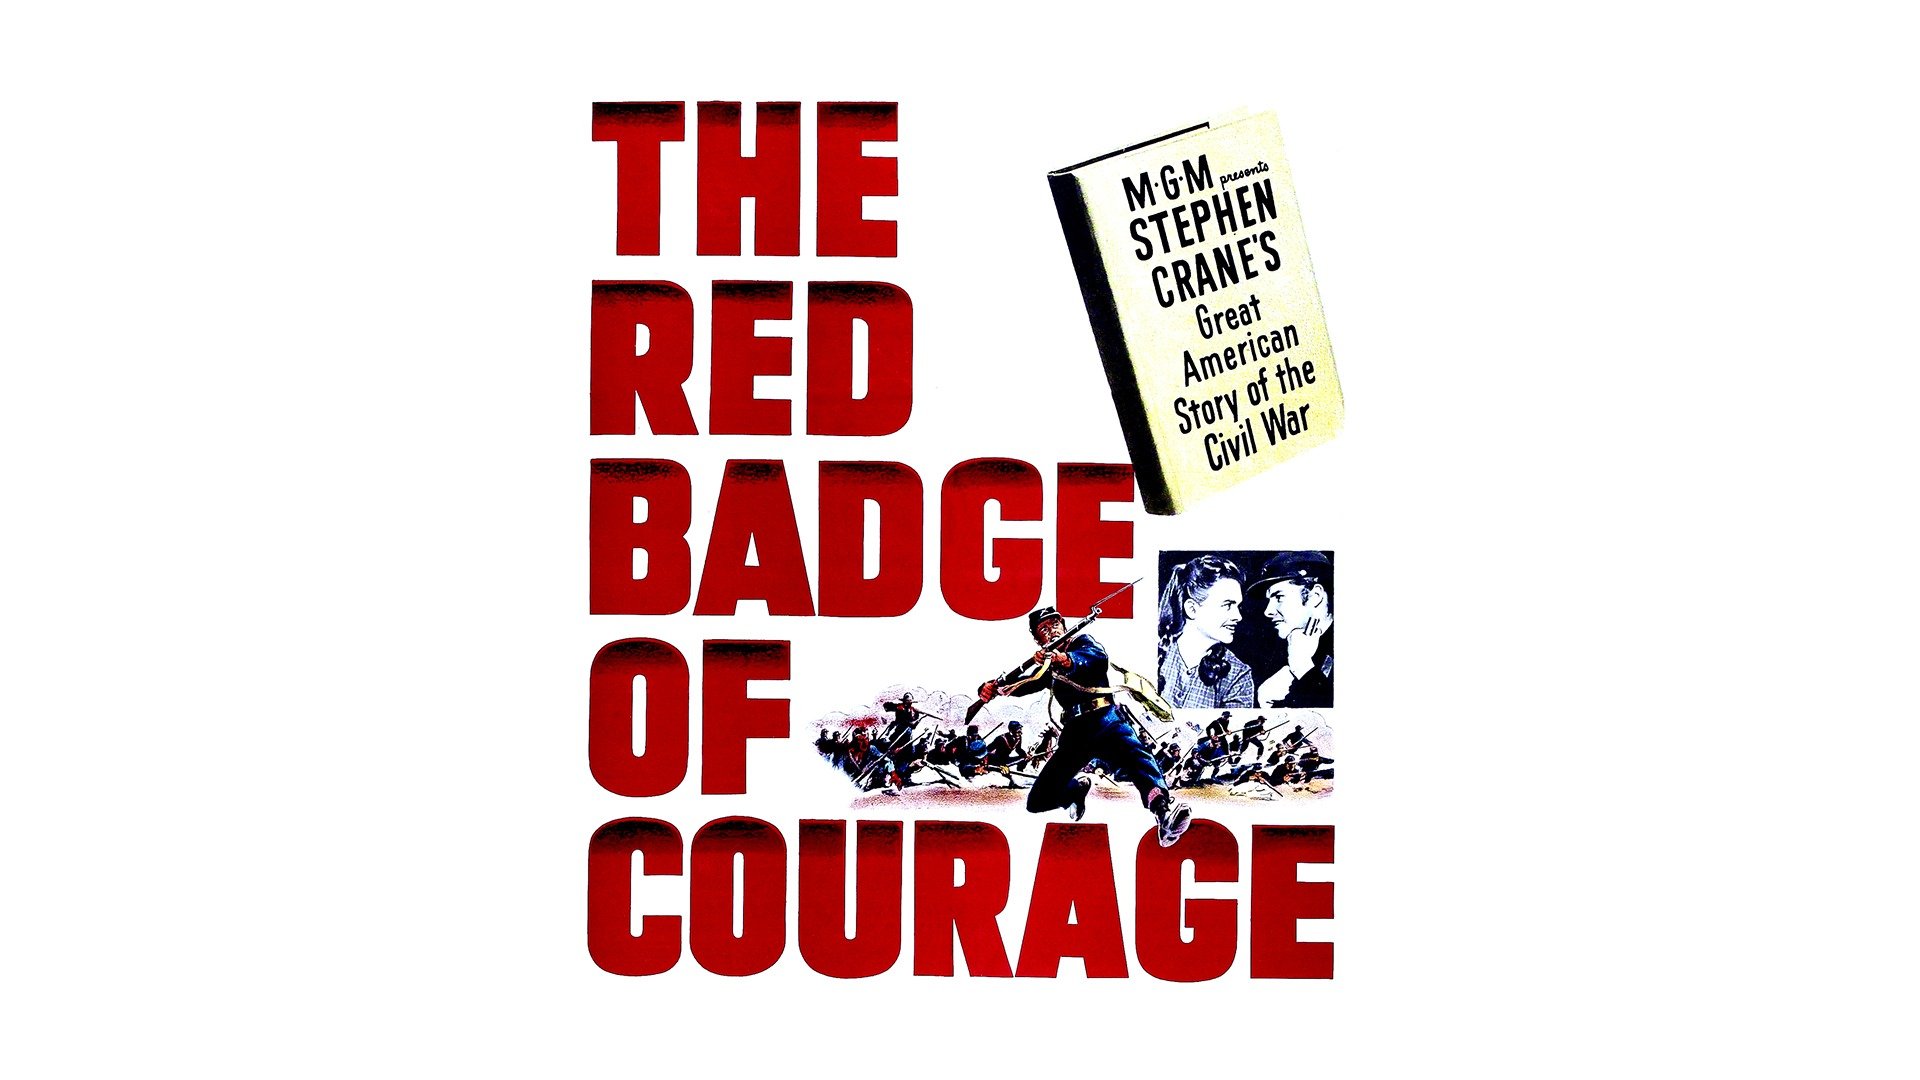 44-facts-about-the-movie-the-red-badge-of-courage